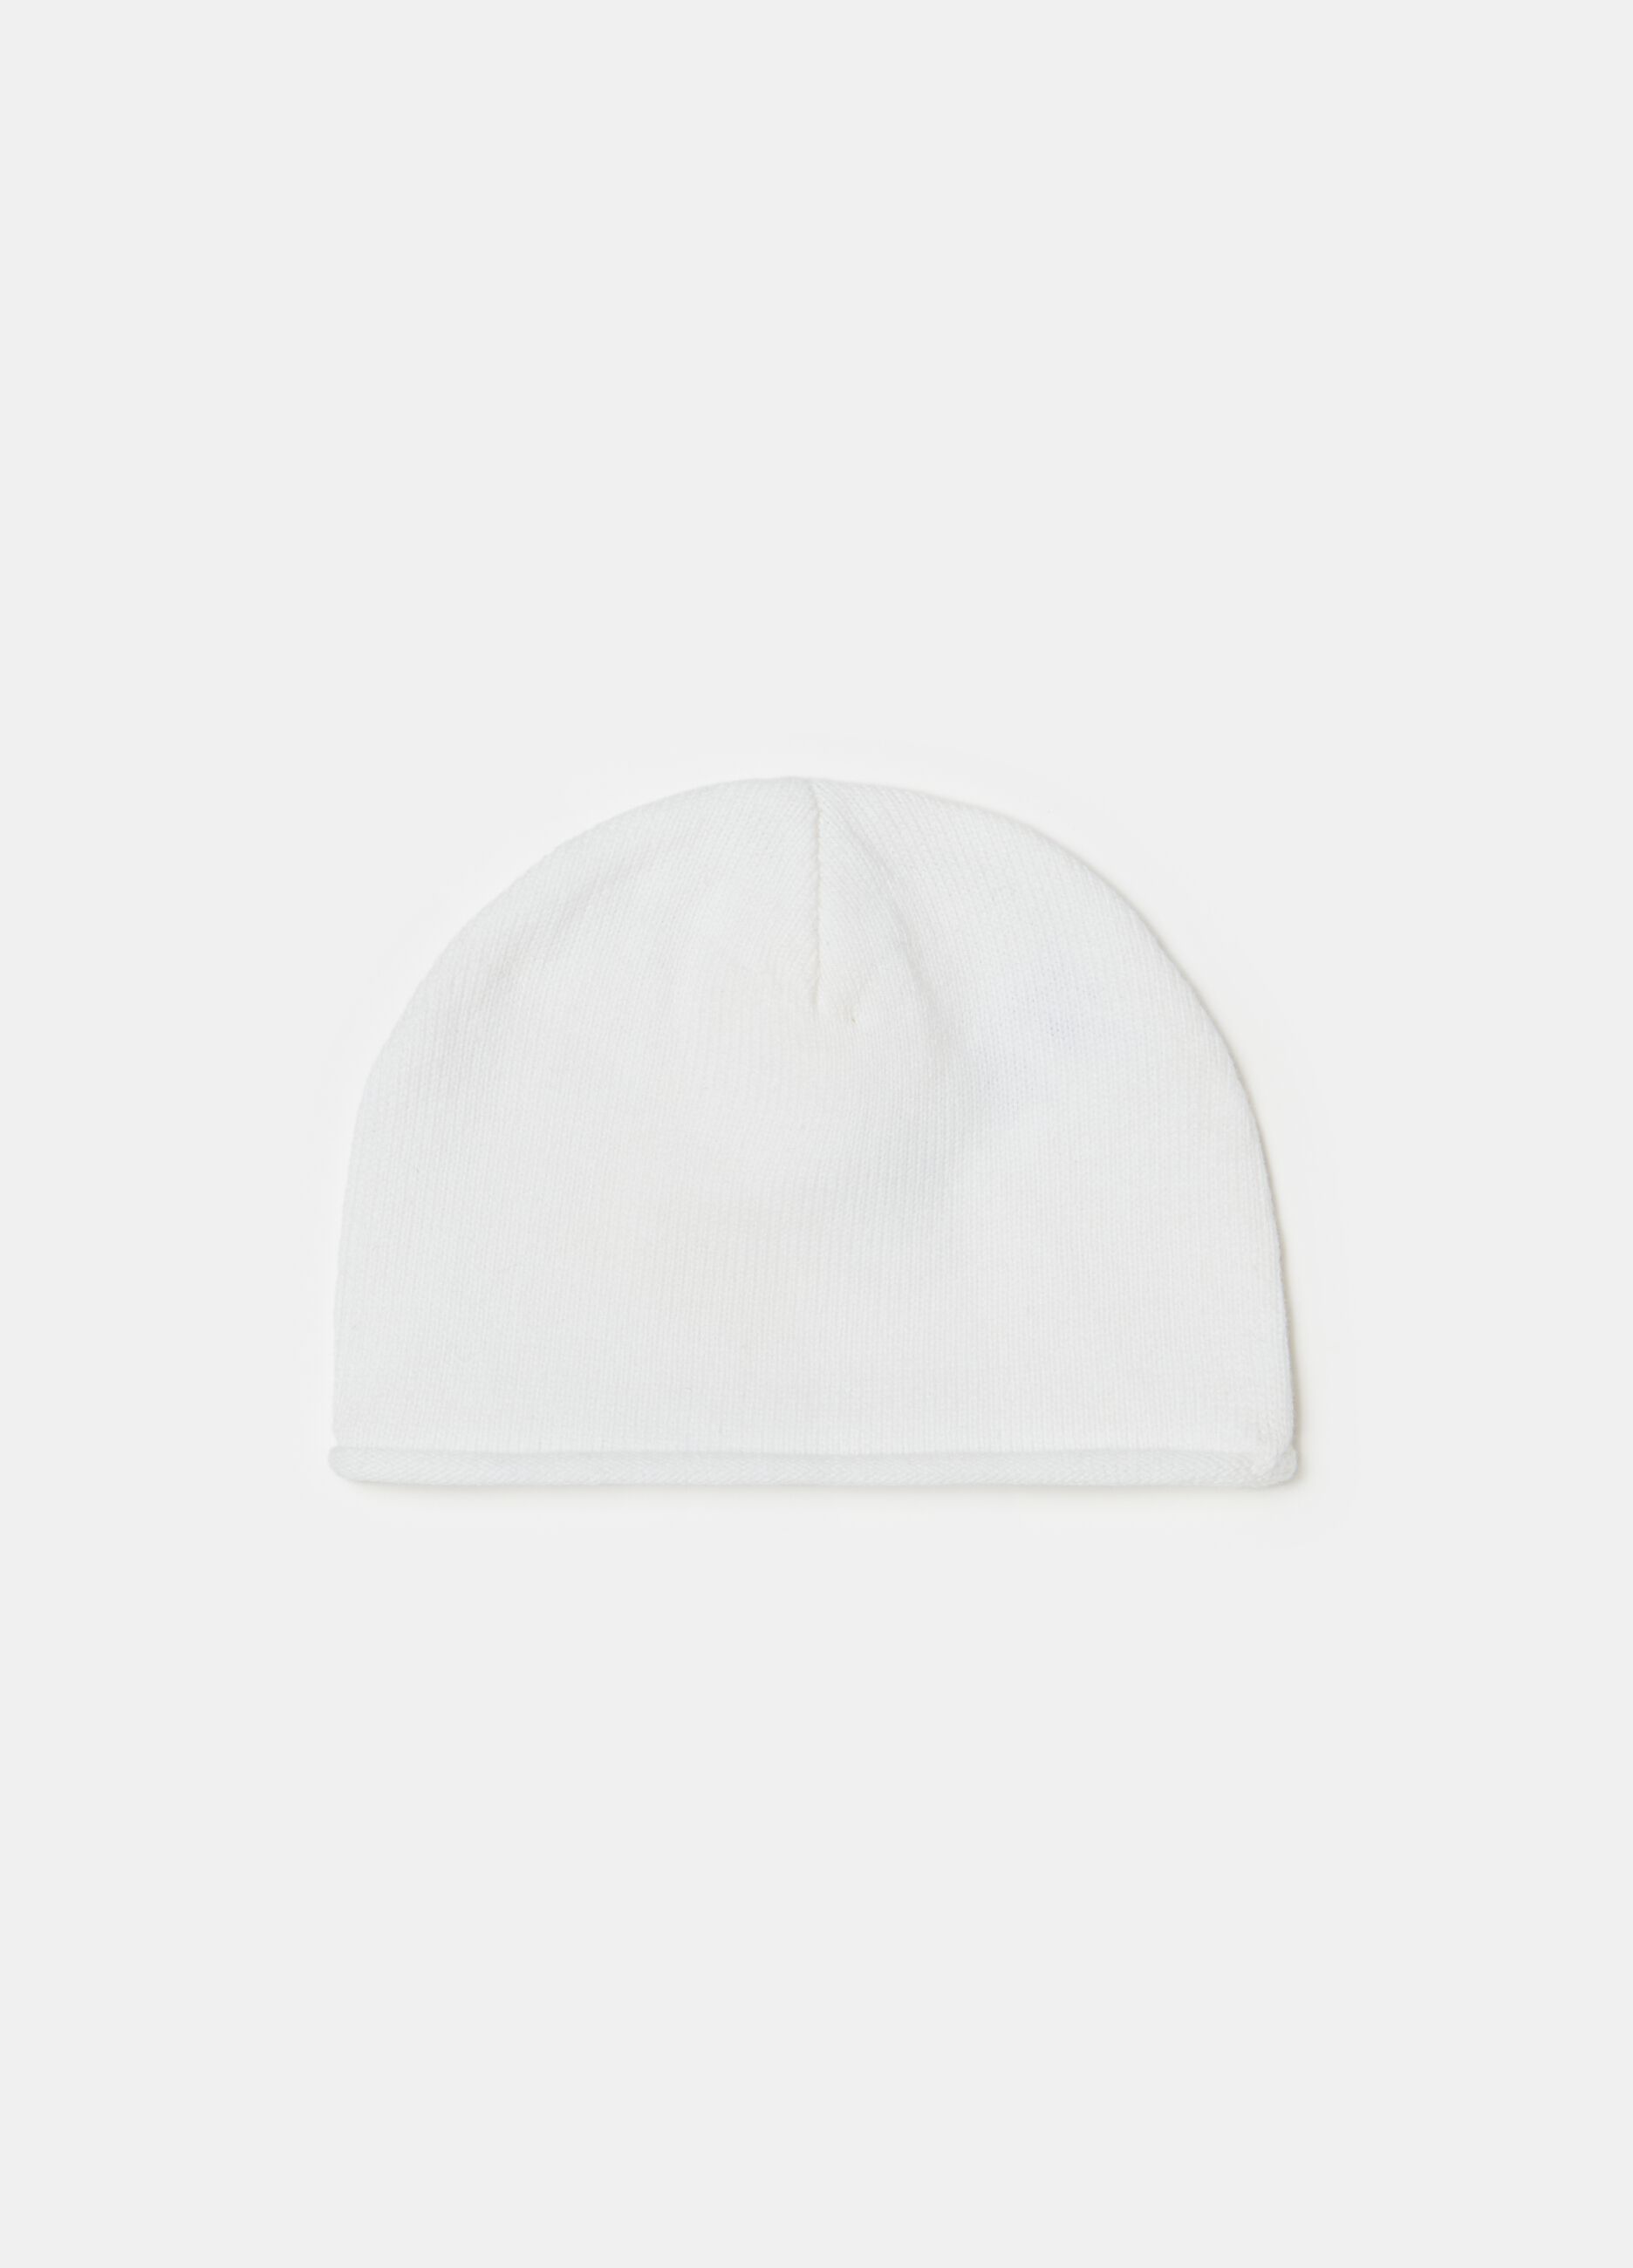 Knitted organic cotton hat